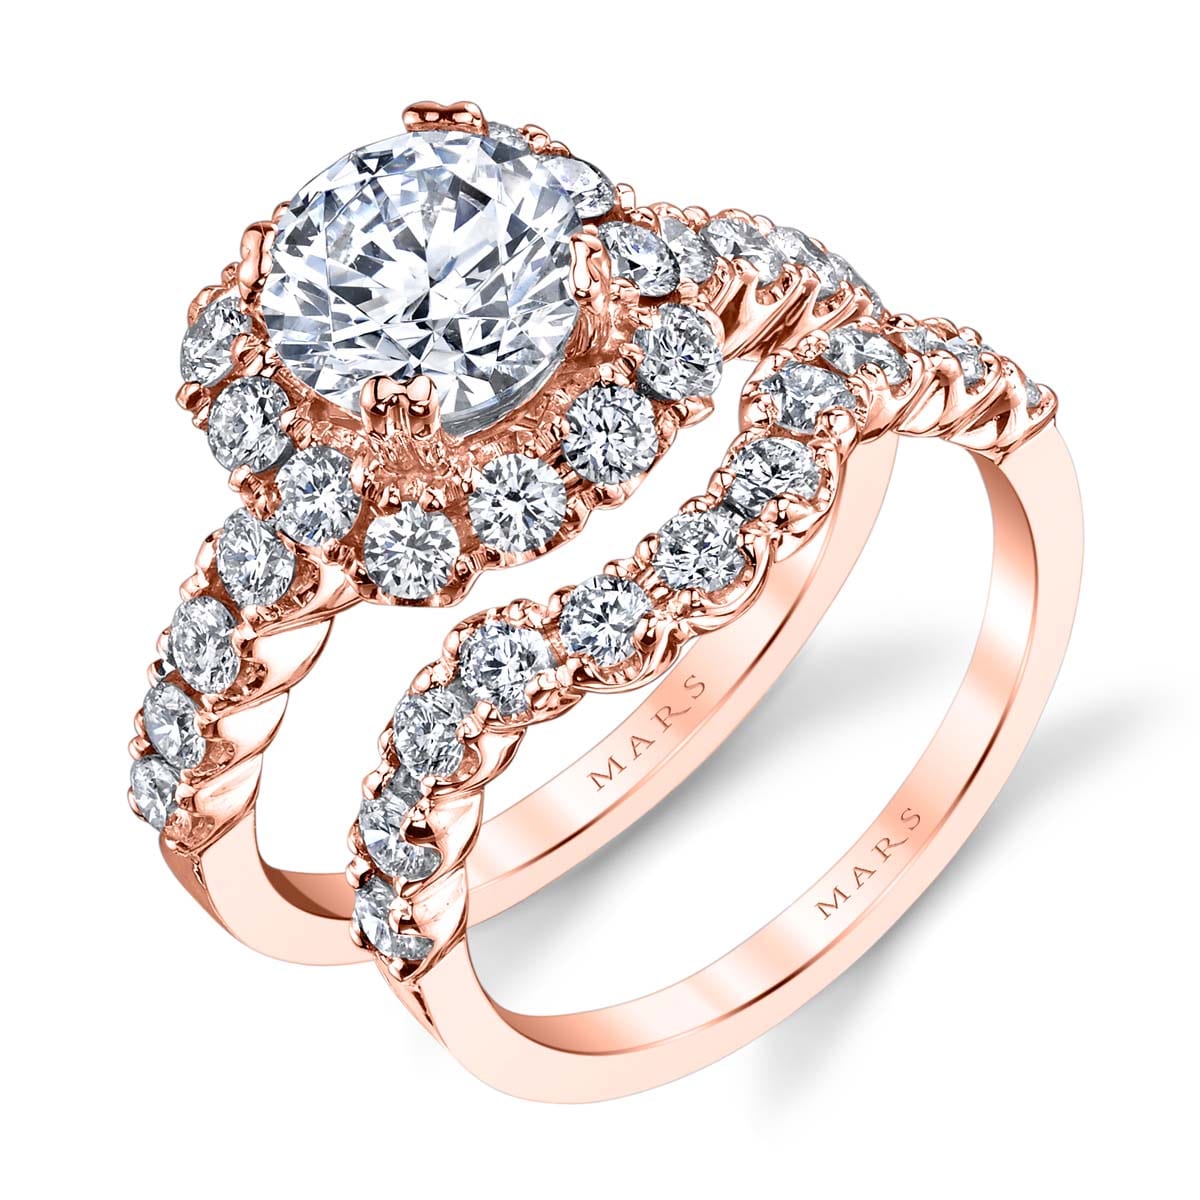 Halo Pave Engagement rings: MARKS-26496-18KR - Mark's Diamonds